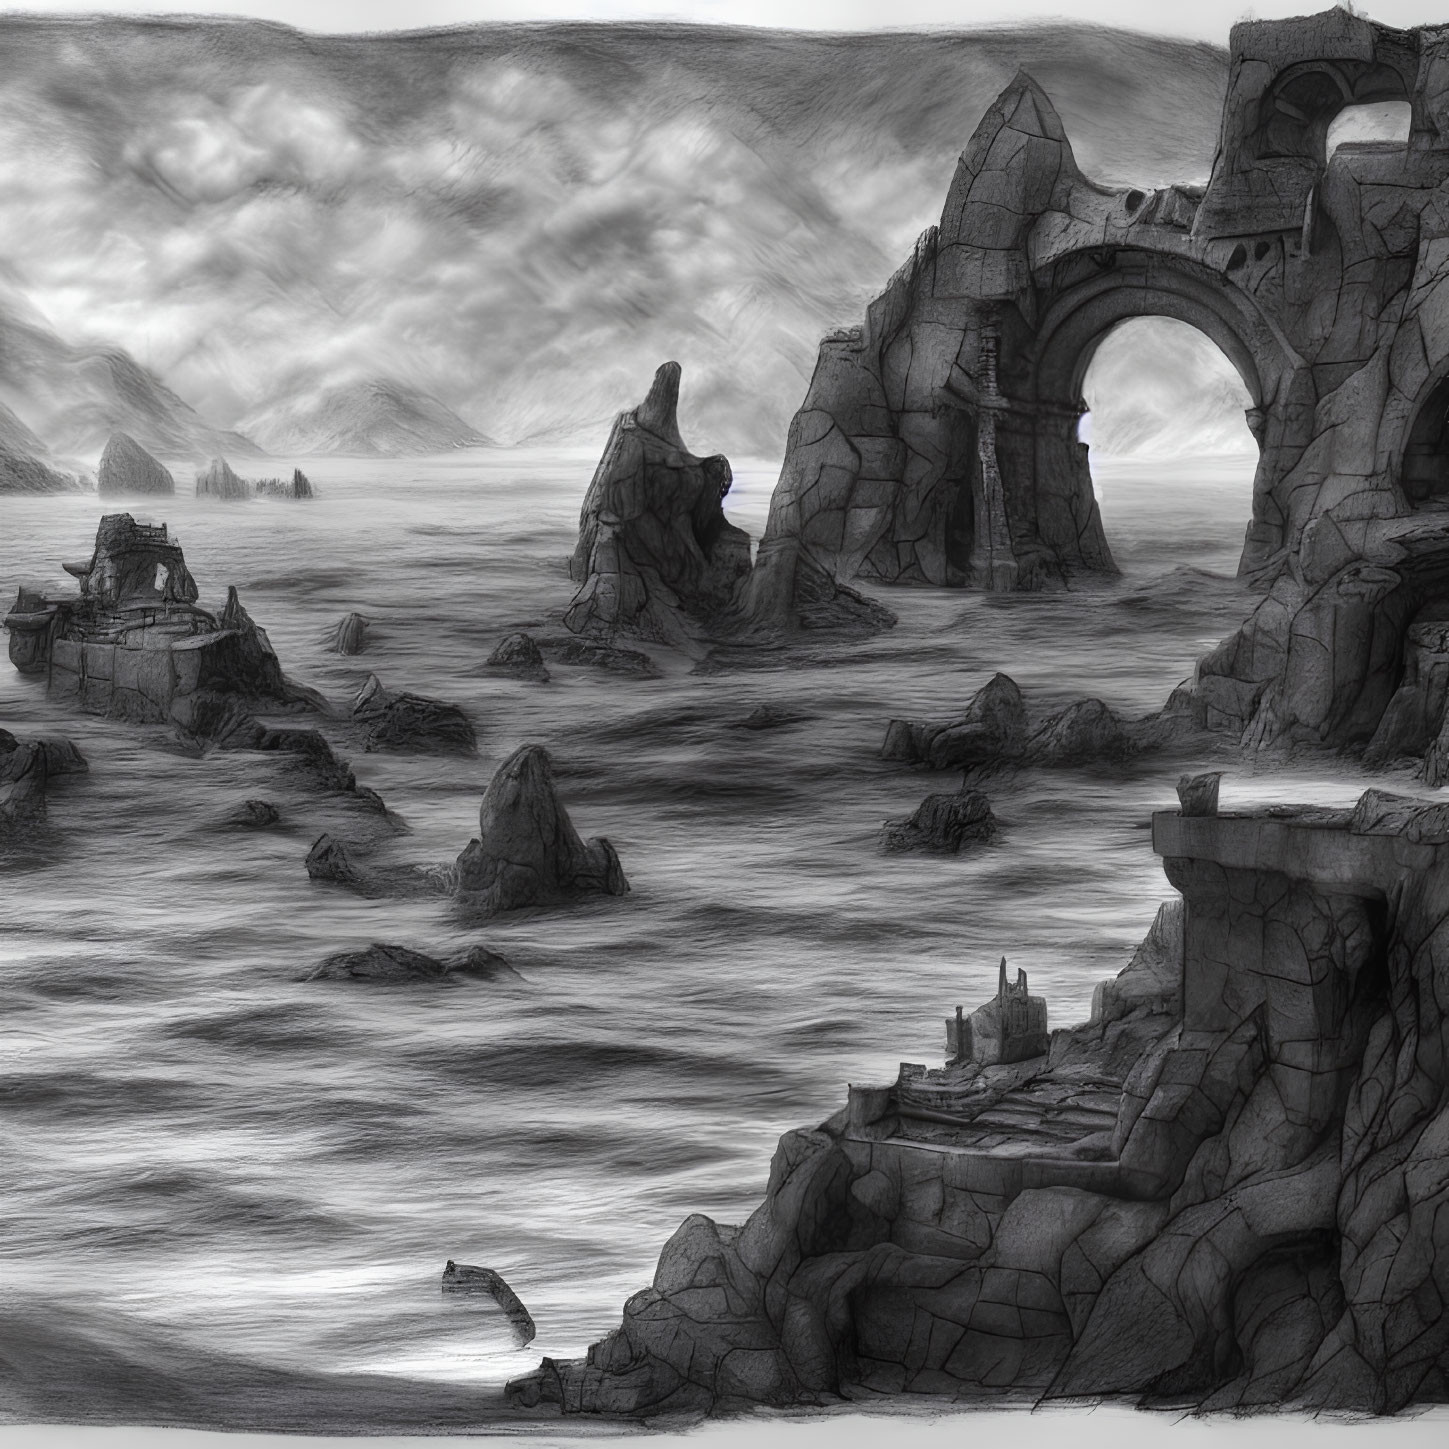 Monochromatic seascape with rocky shore, arch ruins, and cliffs under cloudy sky